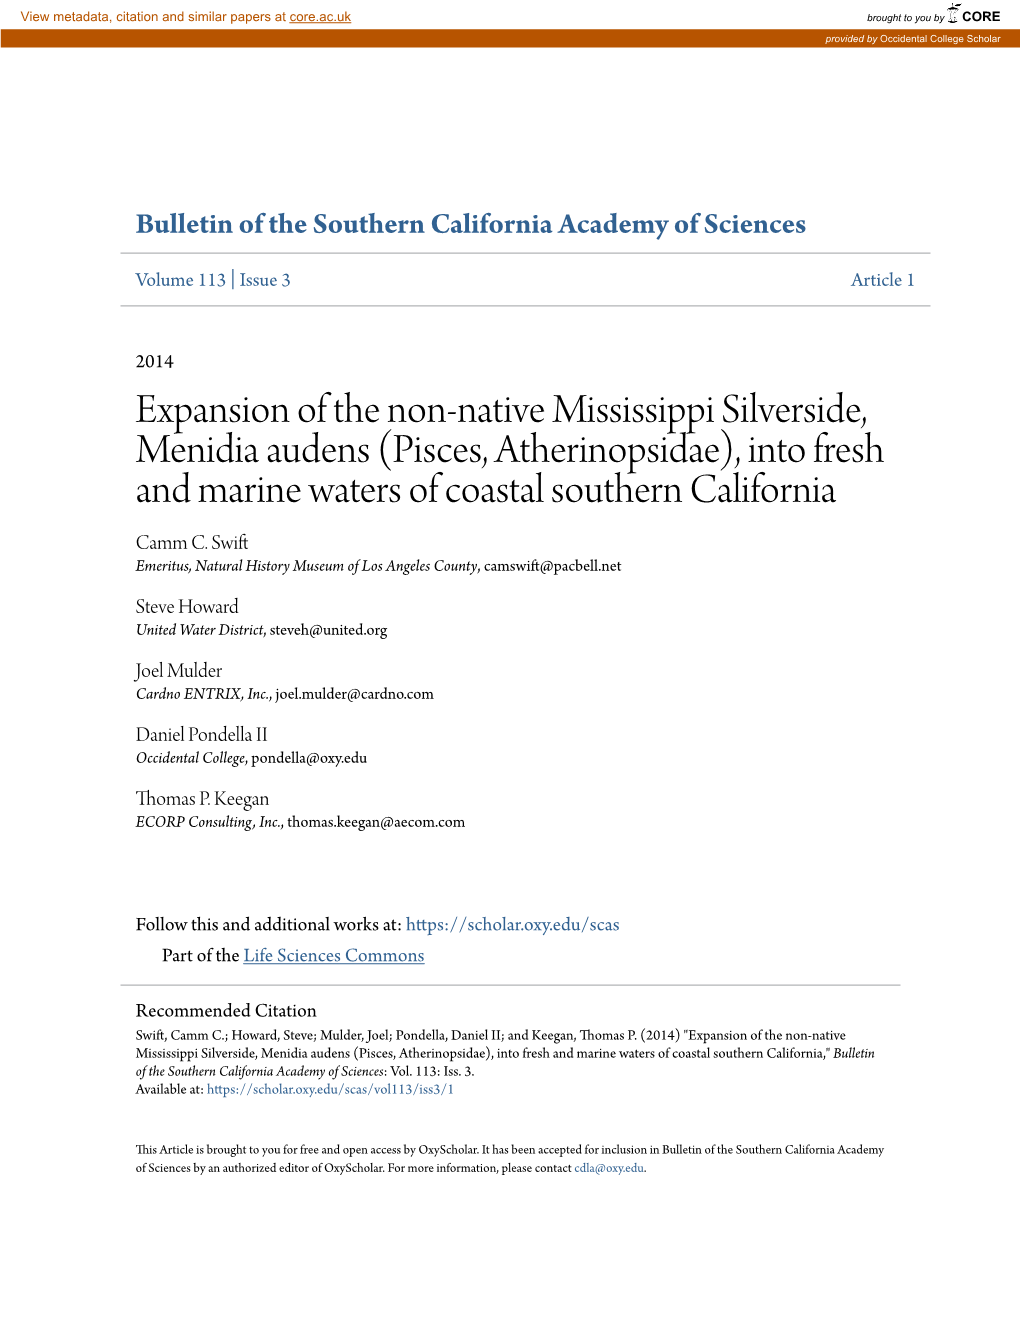 Expansion of the Non-Native Mississippi Silverside, Menidia Audens (Pisces, Atherinopsidae), Into Fresh and Marine Waters of Coastal Southern California Camm C